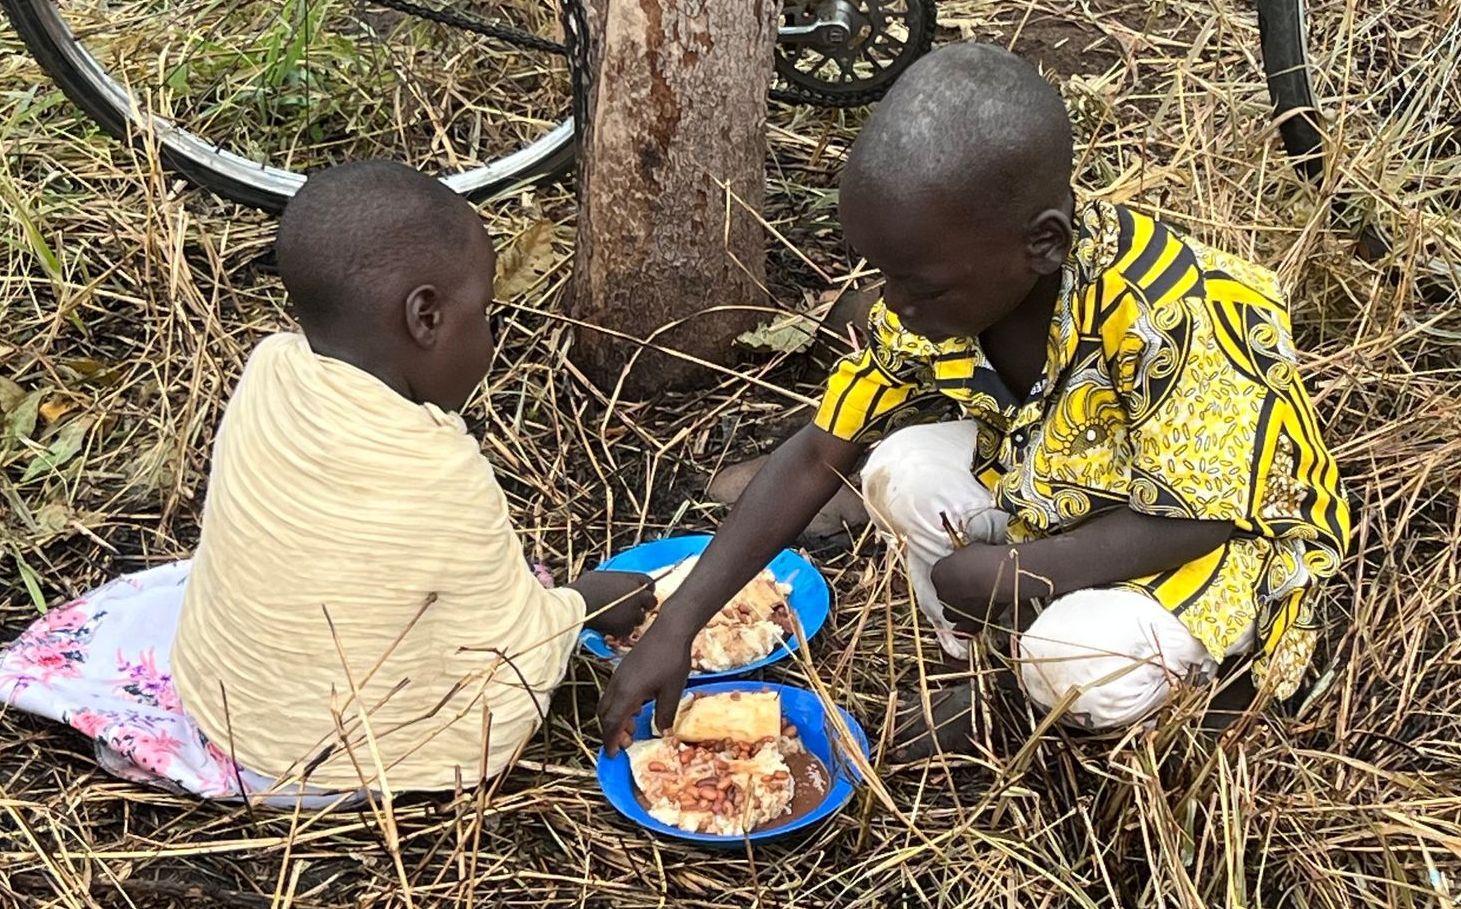 Two starving children in the refugee settlements of South Sudan receive a meal from Amigos Internaci